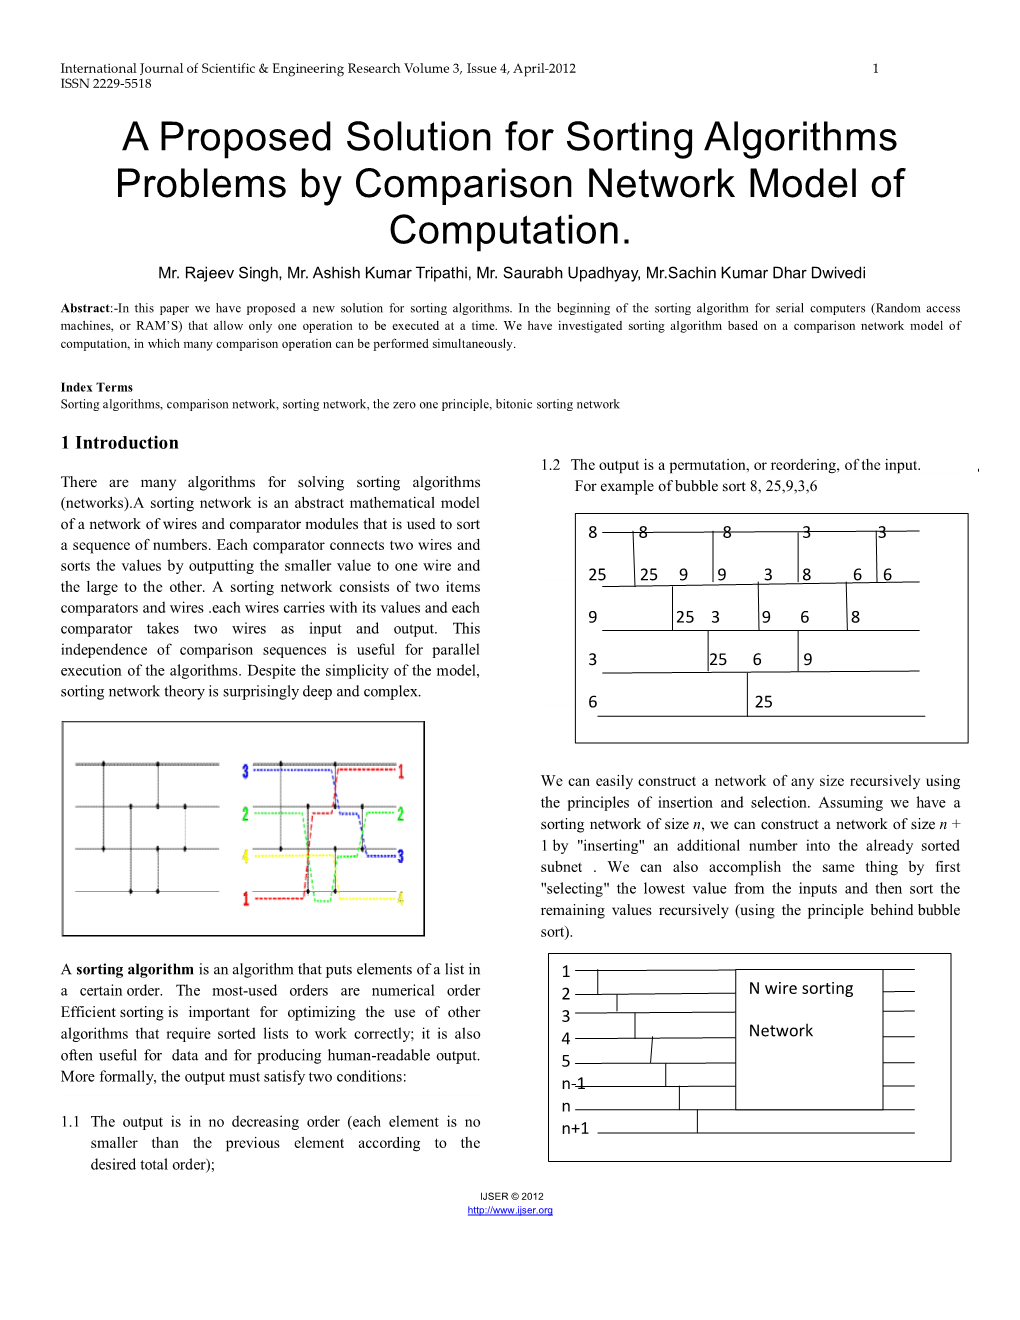 A Proposed Solution for Sorting Algorithms Problems by Comparison Network Model of Computation